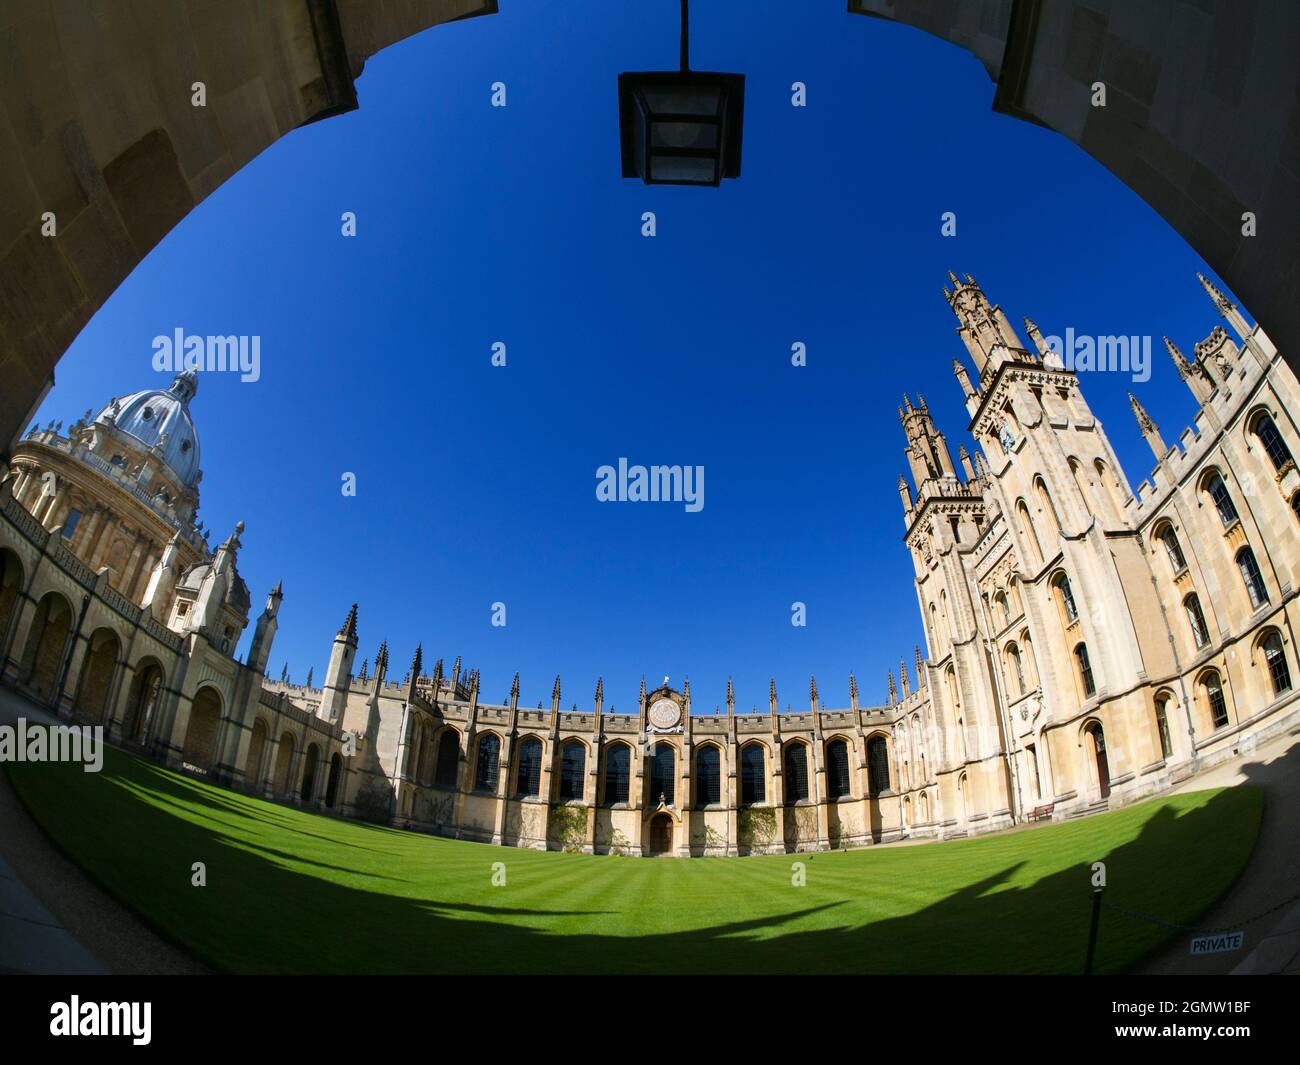 Oxford, England - 15 May 2015; no people in view. All Souls College was founded by Henry VI of England and the Archbishop of Canterbury, in 1438.  Uni Stock Photo